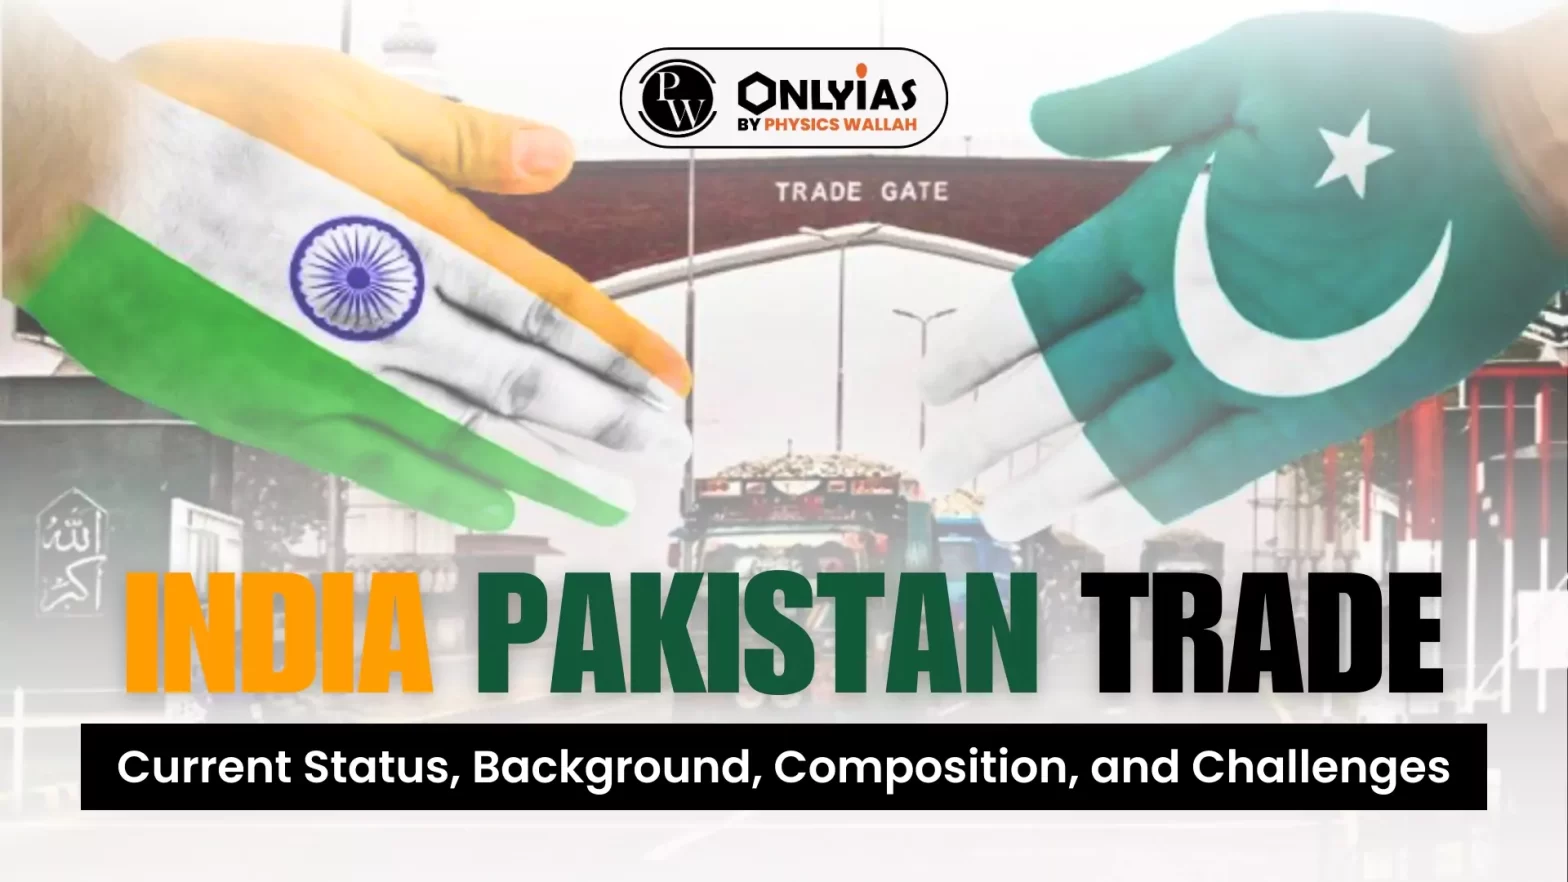 India Pakistan Trade: Current Status, Background, Composition, and Challenges